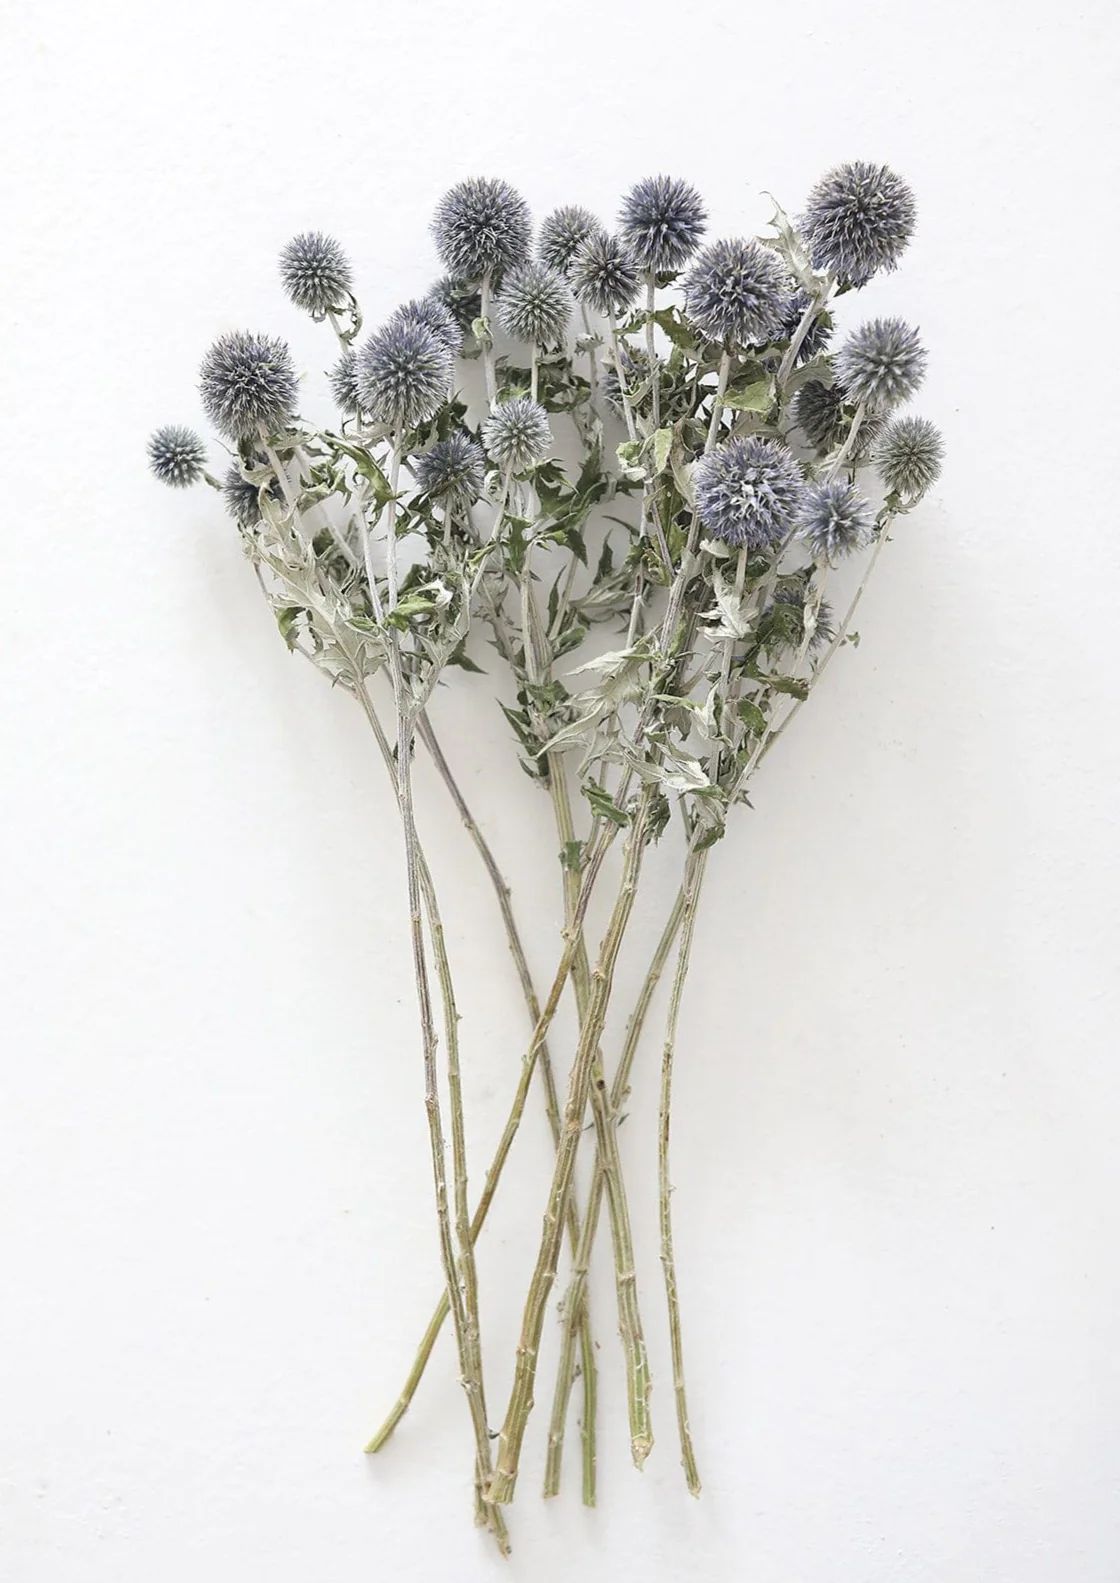 Blue Globe Thistle | Dried Flowers & Wildflowers at Afloral.com | Afloral